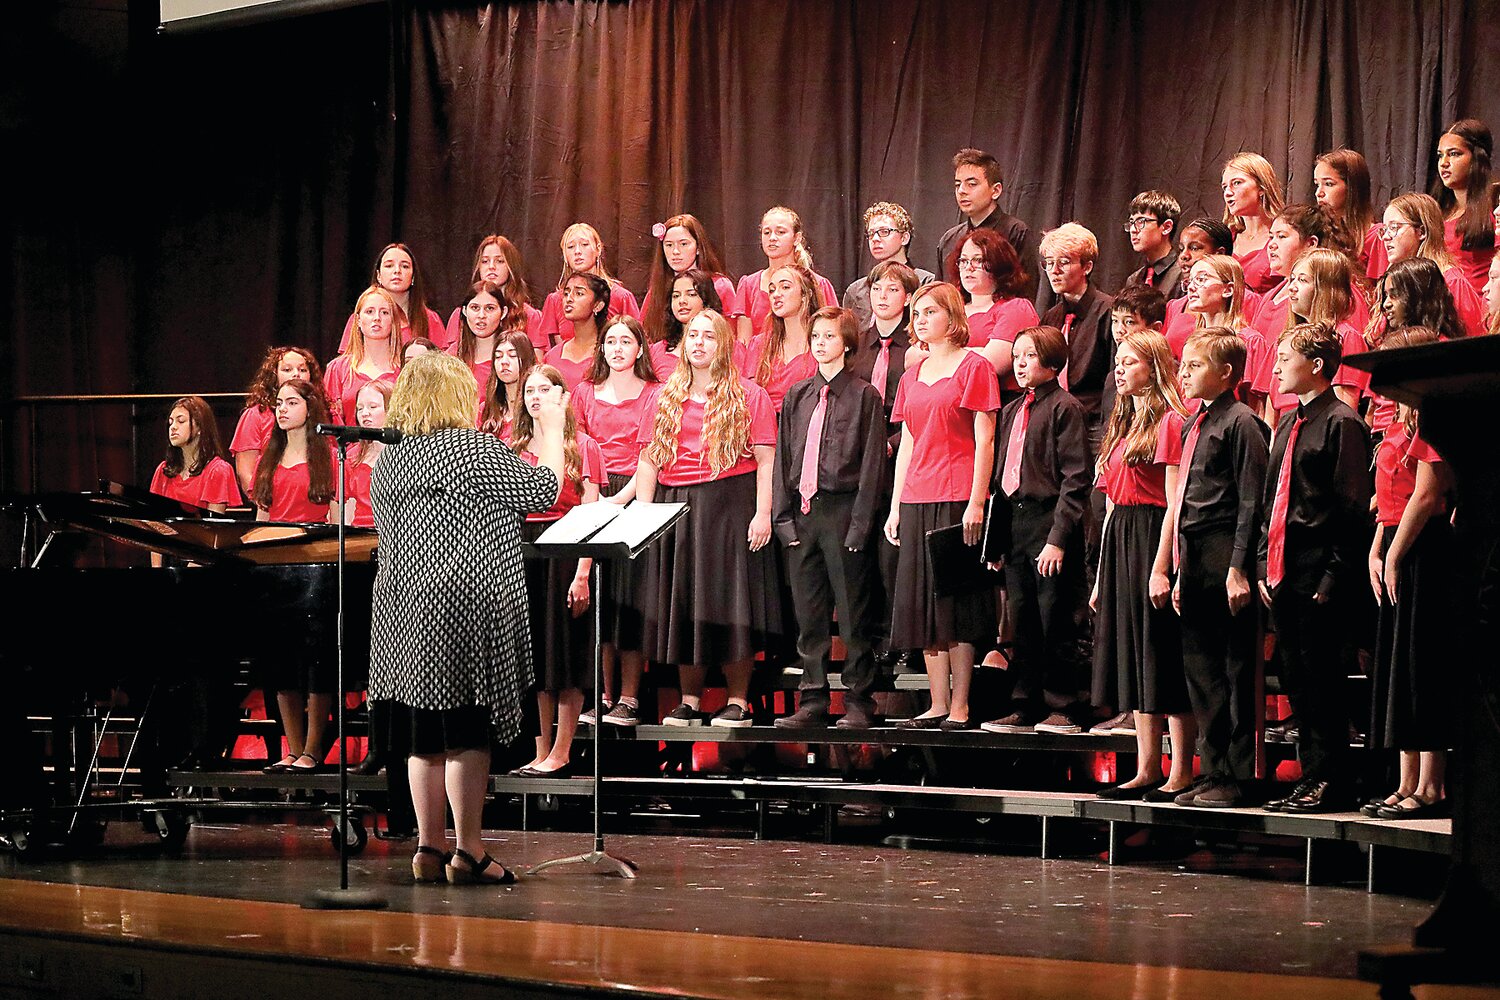 The Lenape Middle School Select Choir is led by choir director and OHMTEC board member Jaime Rogers.